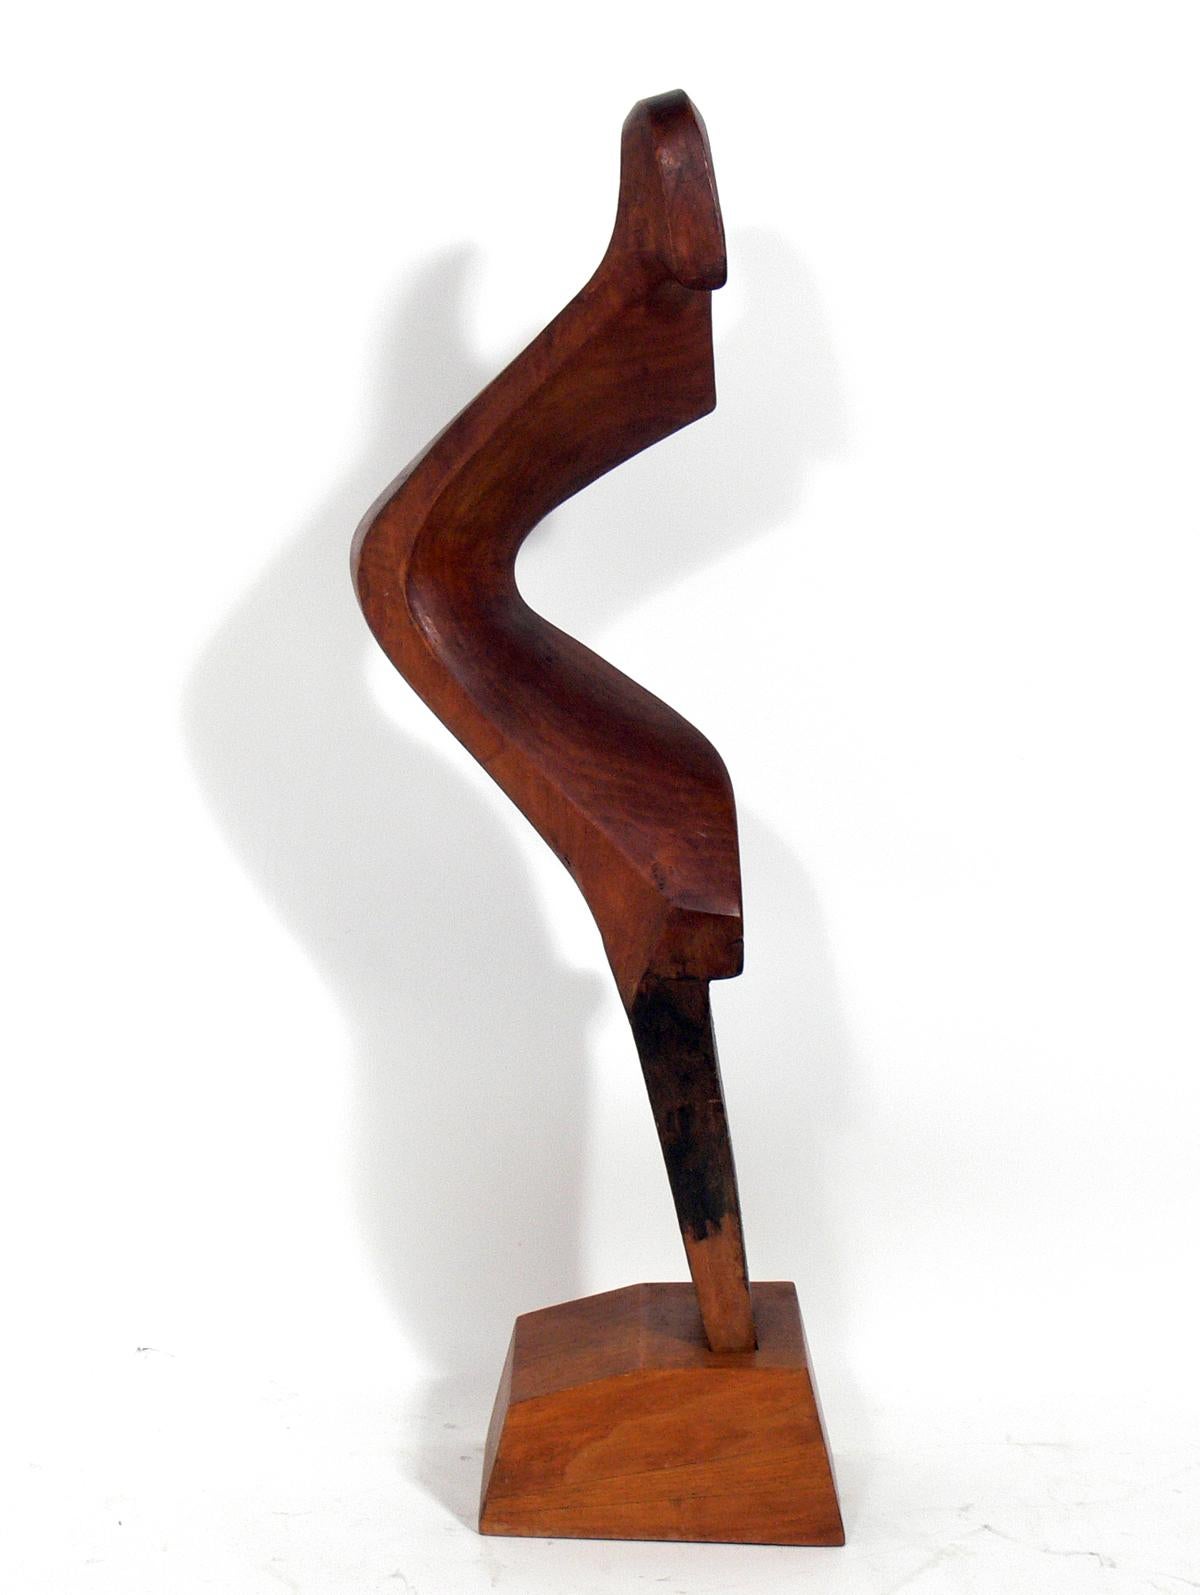 Sculptural forcula handmade by Giuseppe Carli, Italian, circa 1960. Another example of Carli's abstract sculptural forcolas was recently featured in Dwell Magazine, from the collection of architect Peter Gluck, see last two detail photos. Hand